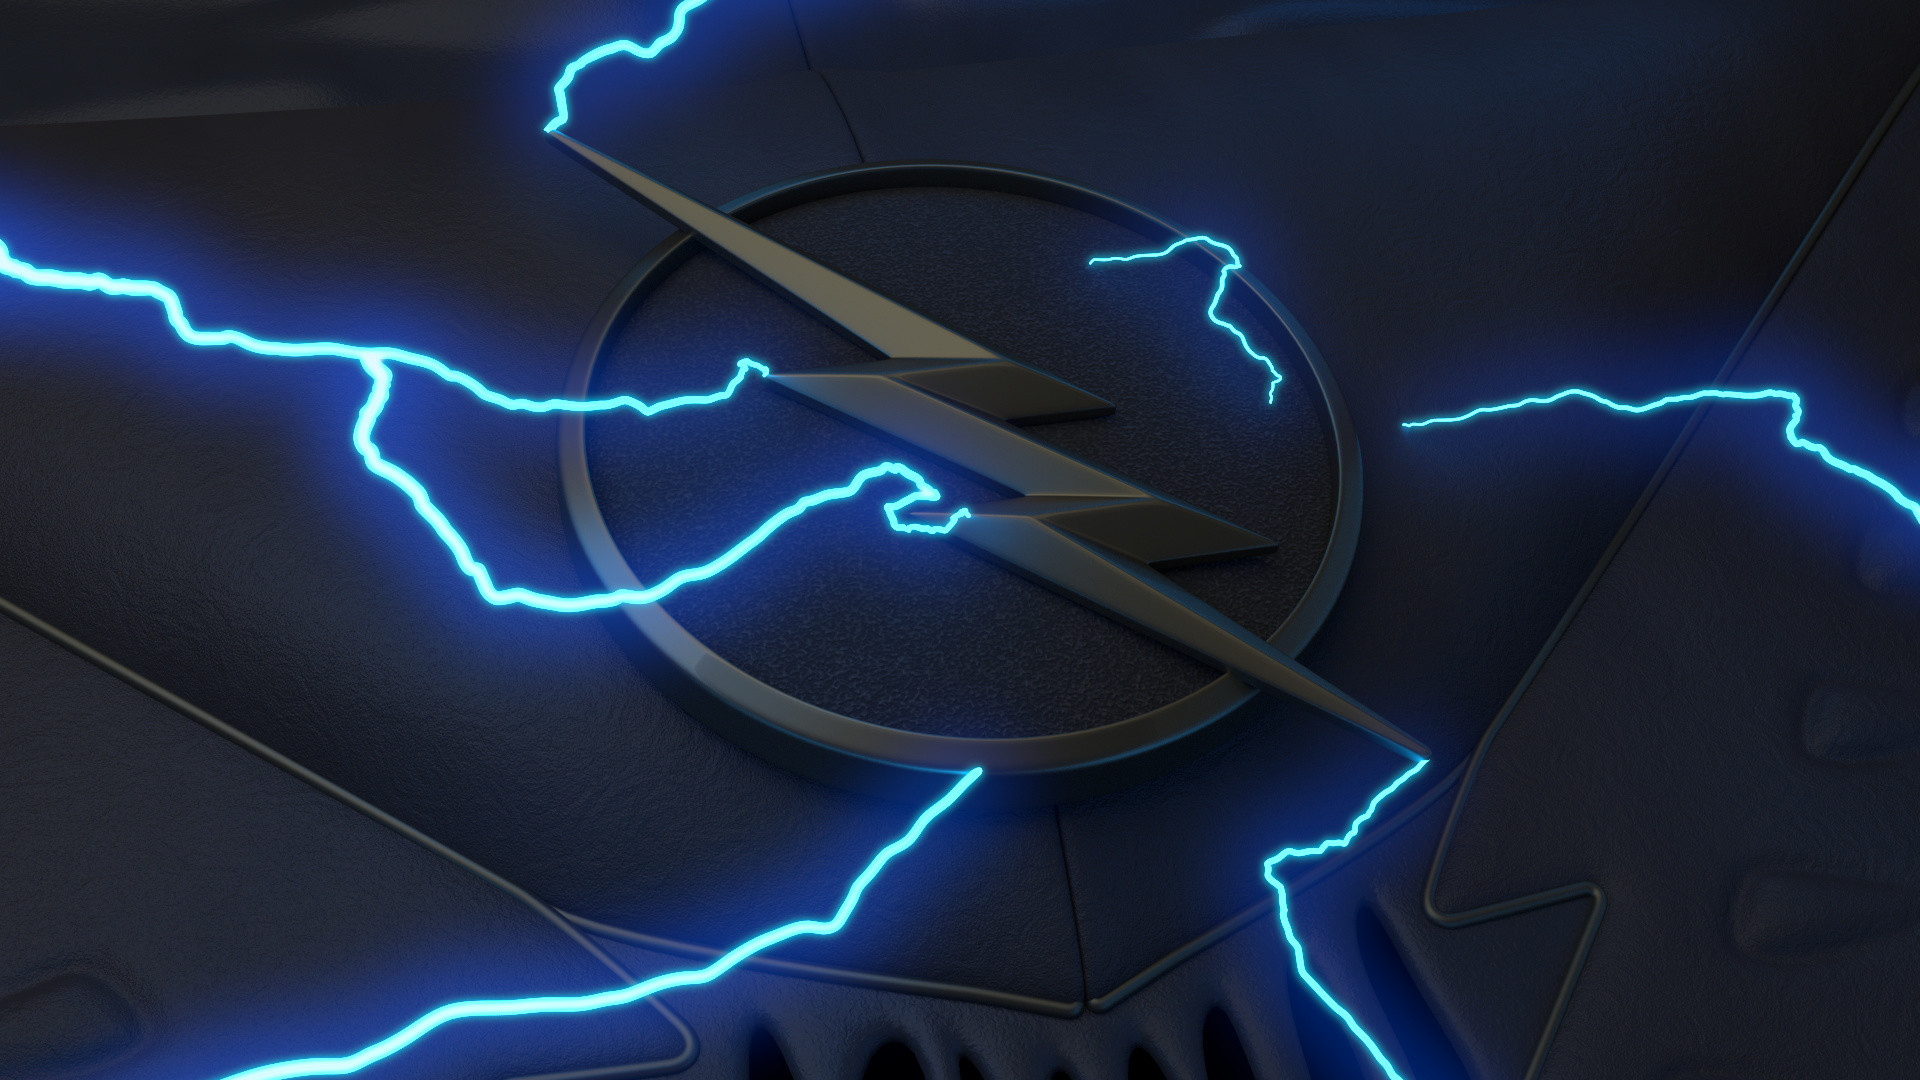 Electrified 3D Zoom wallpaper 1080p more sizes and another style in comments